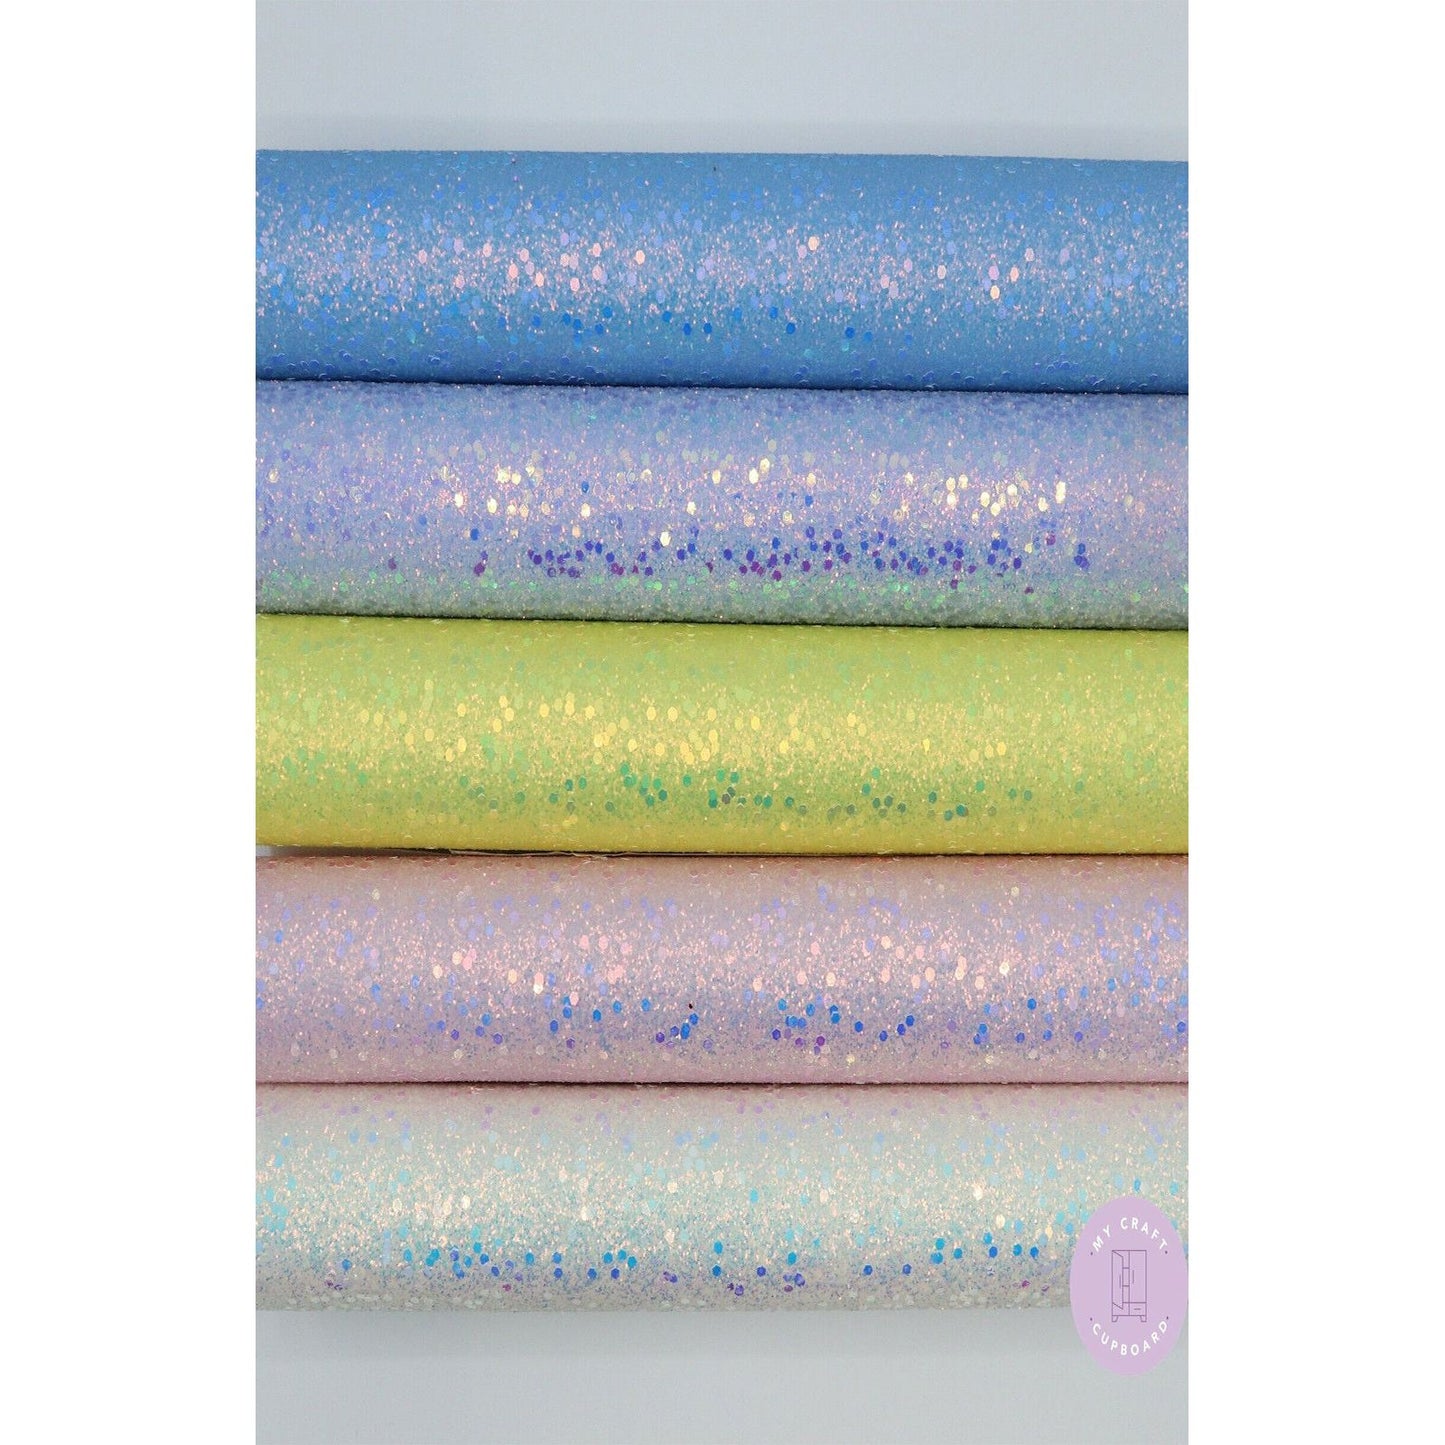 Chunky Glitter A4 Sheets - Hair Bow Making or Crafts - The Princess Collection